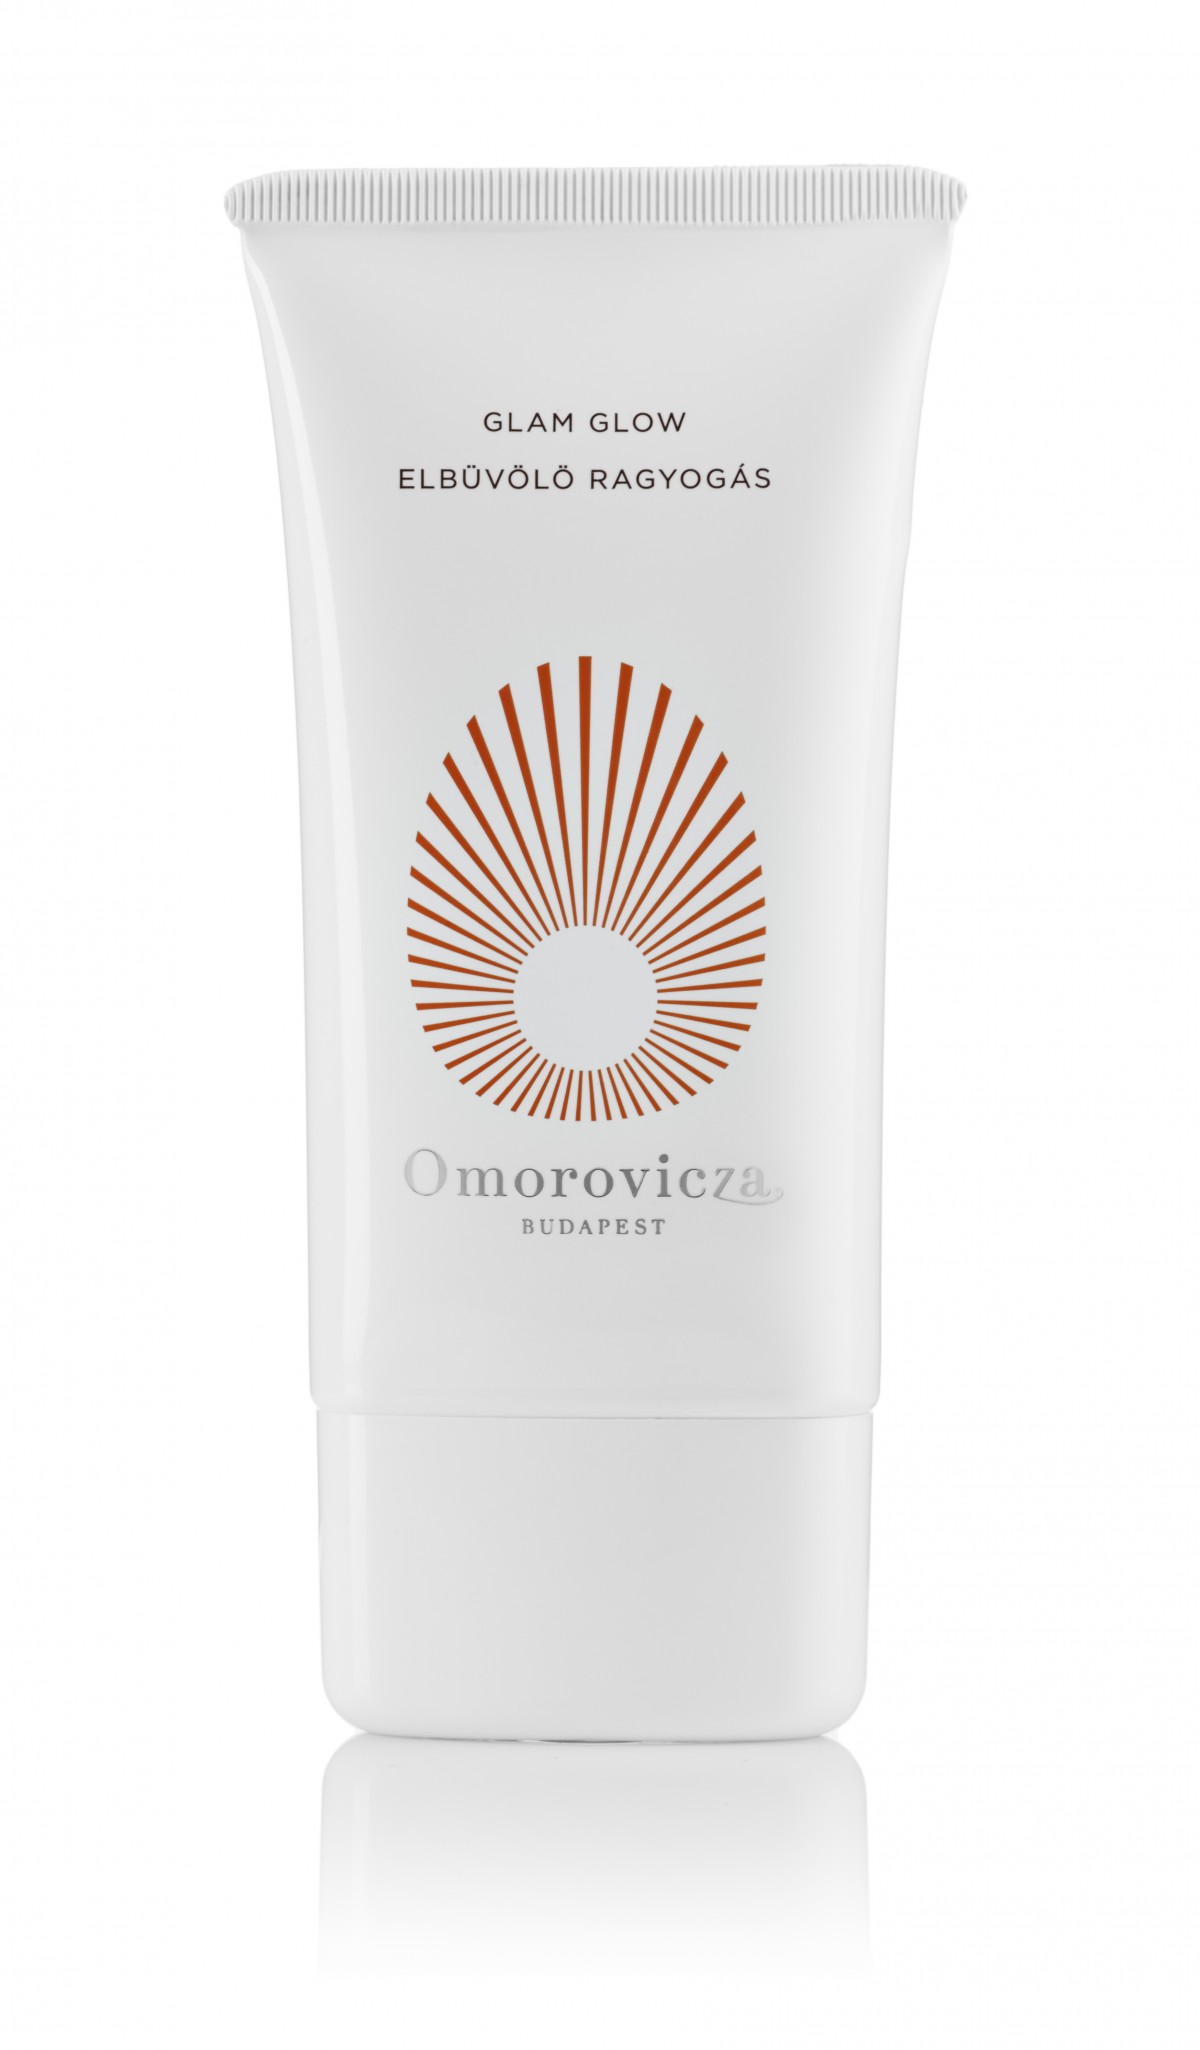 EXCLUSIVE: Get 20% Off Omorovicza Glam Glow